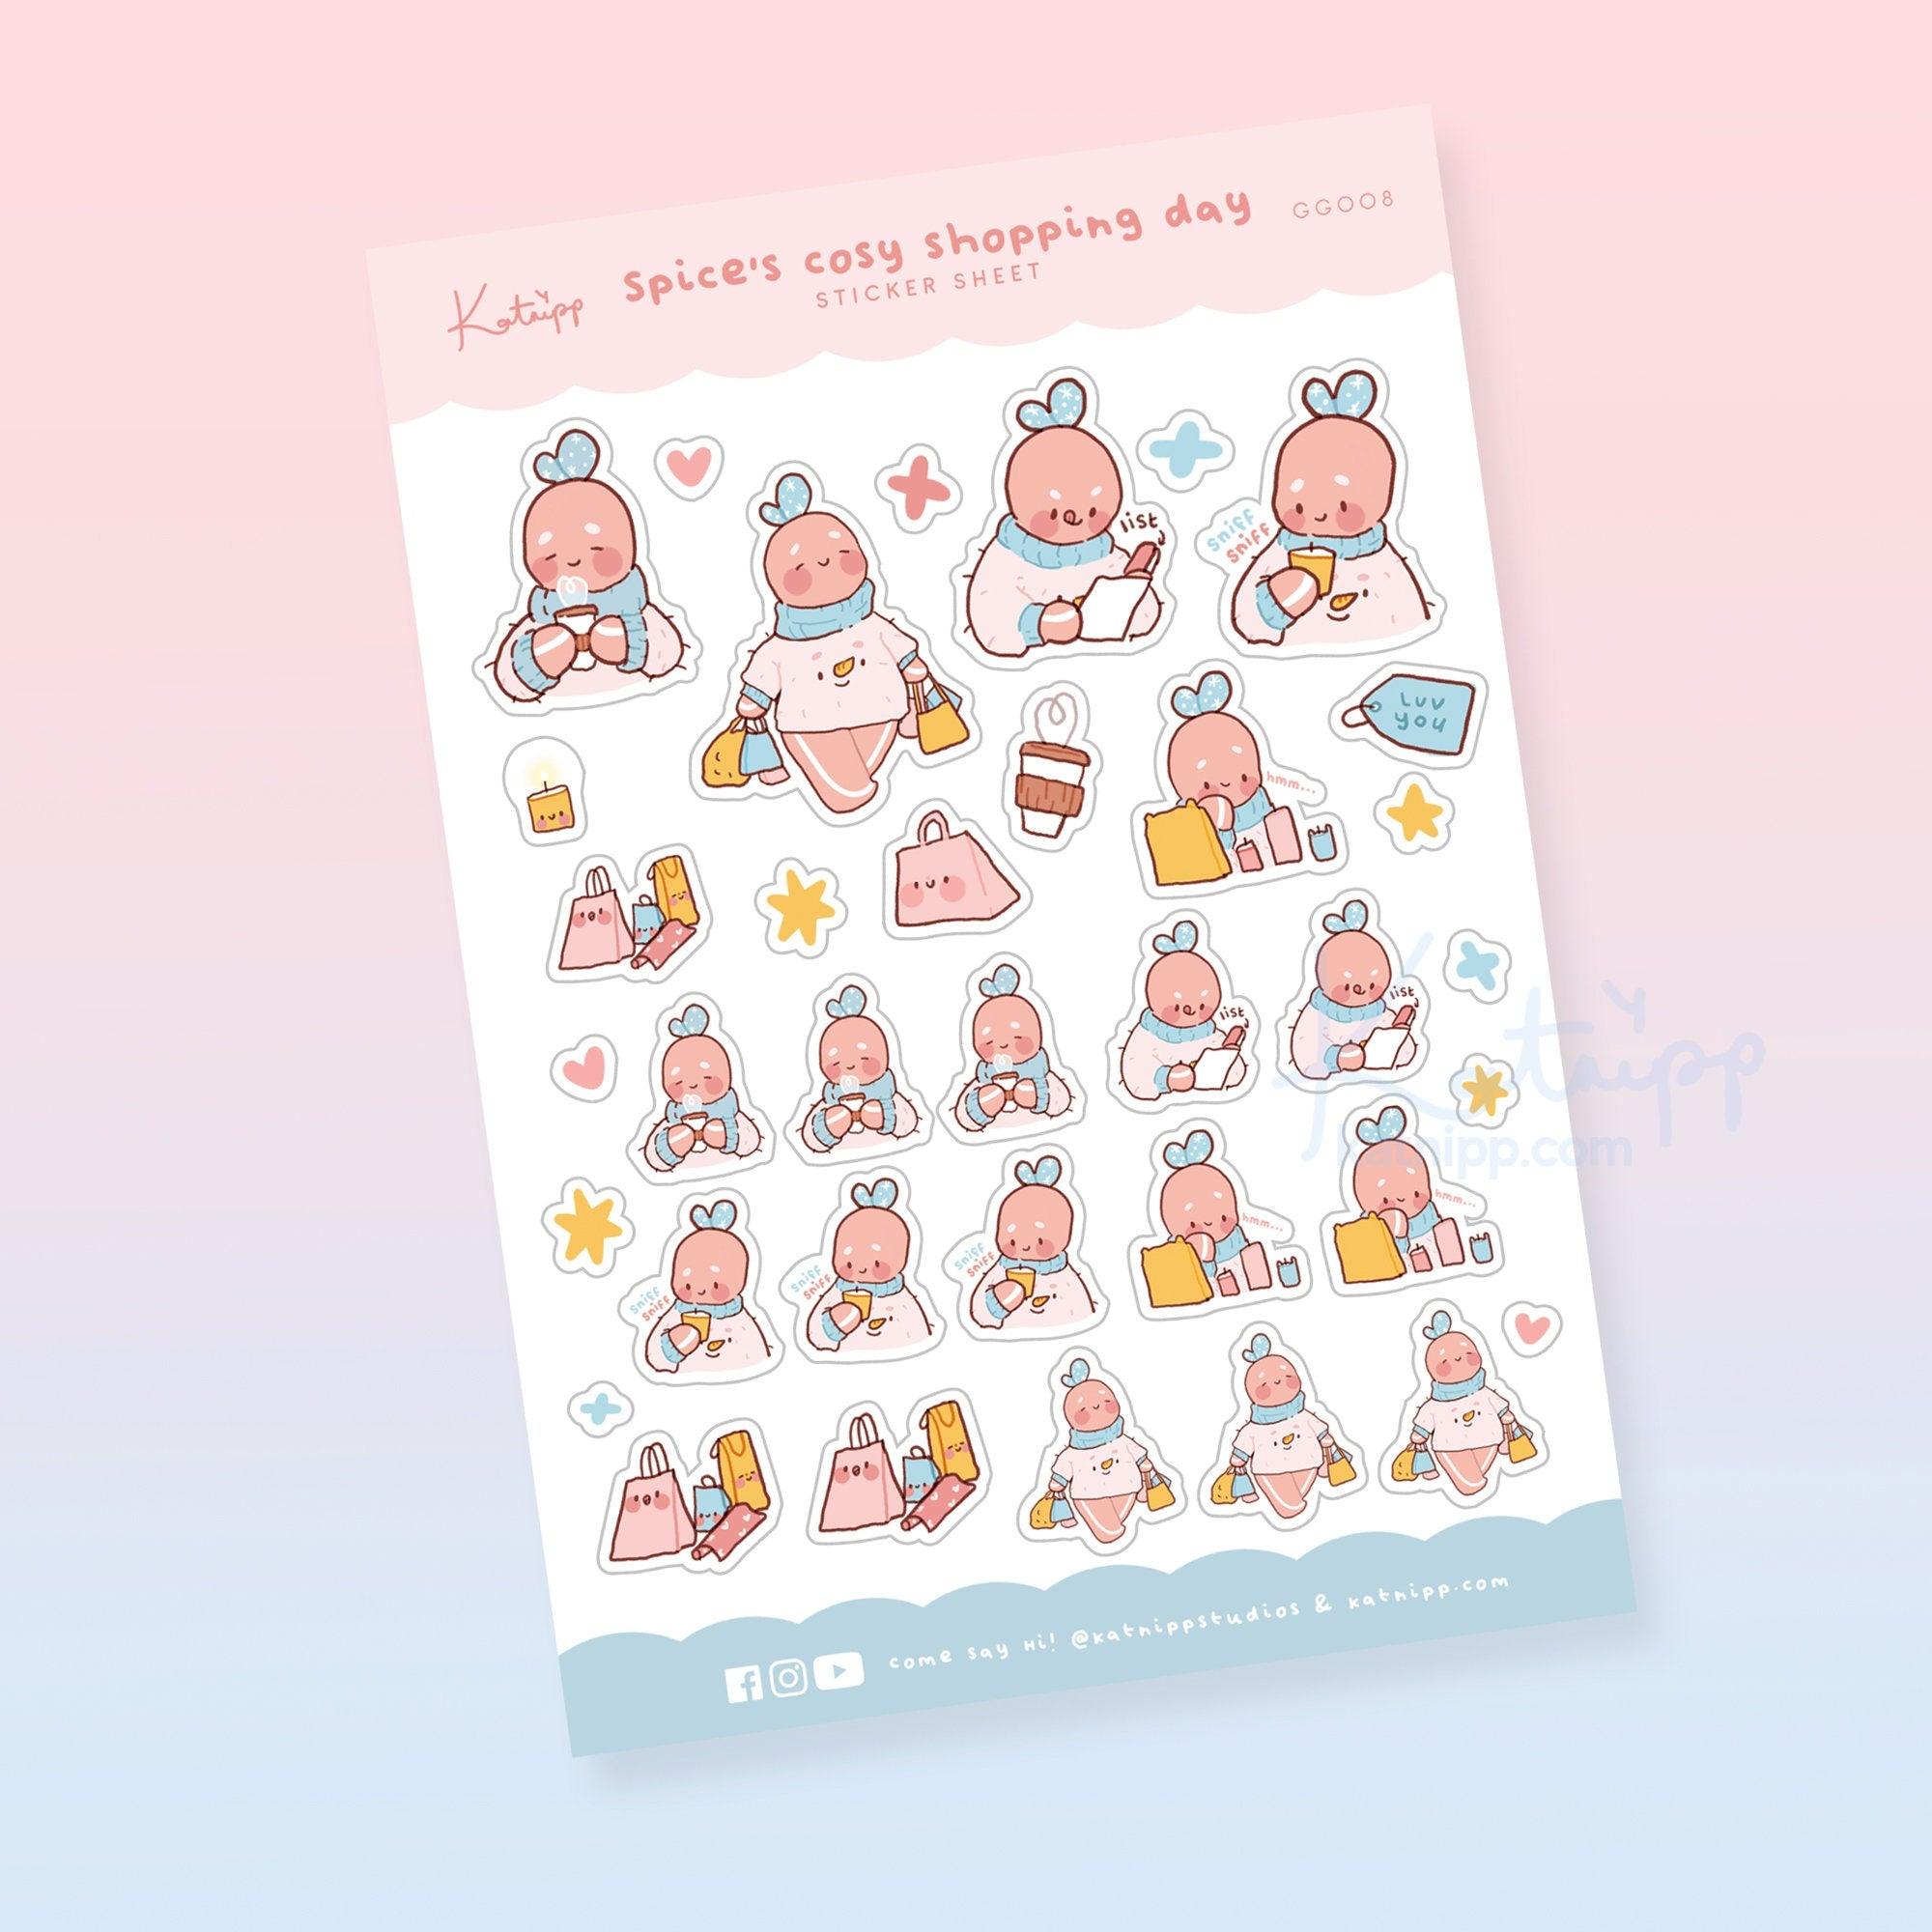 Spice Shopping Day Planner Stickers - GG008 - Katnipp Studios